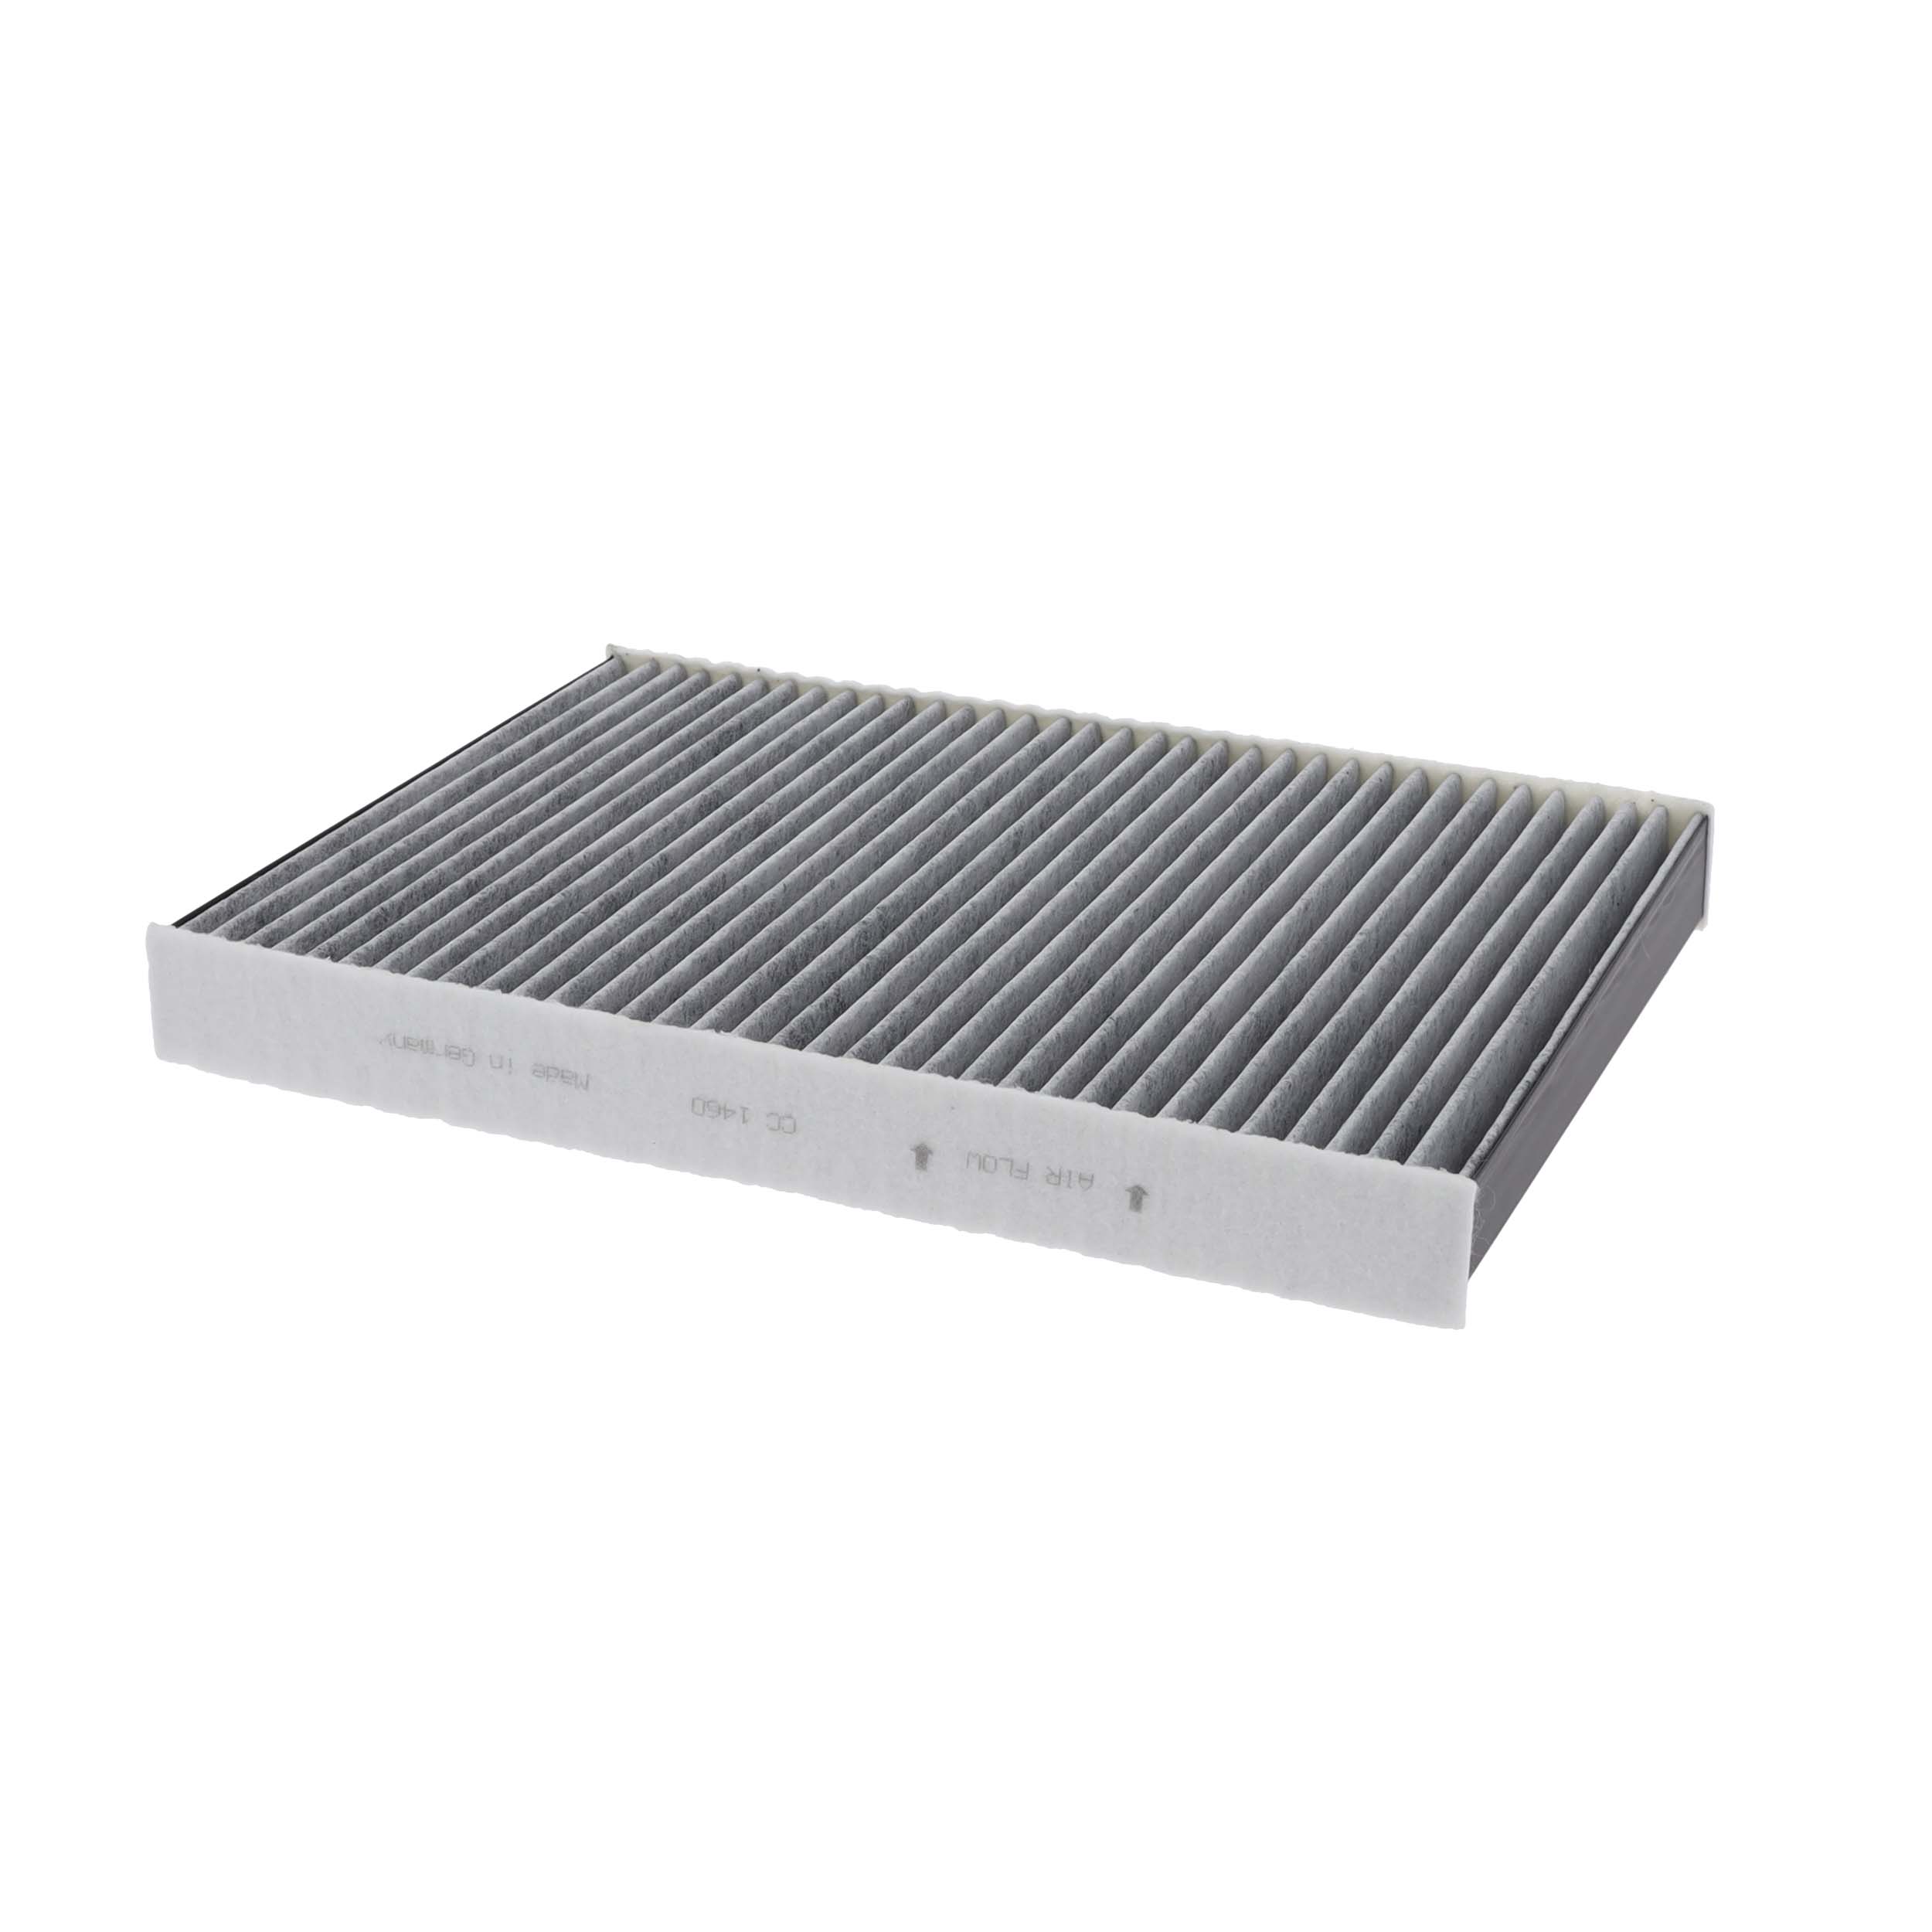 CORTECO Activated Carbon Filter, 277 mm x 195 mm x 30 mm Width: 195mm, Height: 30mm, Length: 277mm Cabin filter 80004556 buy